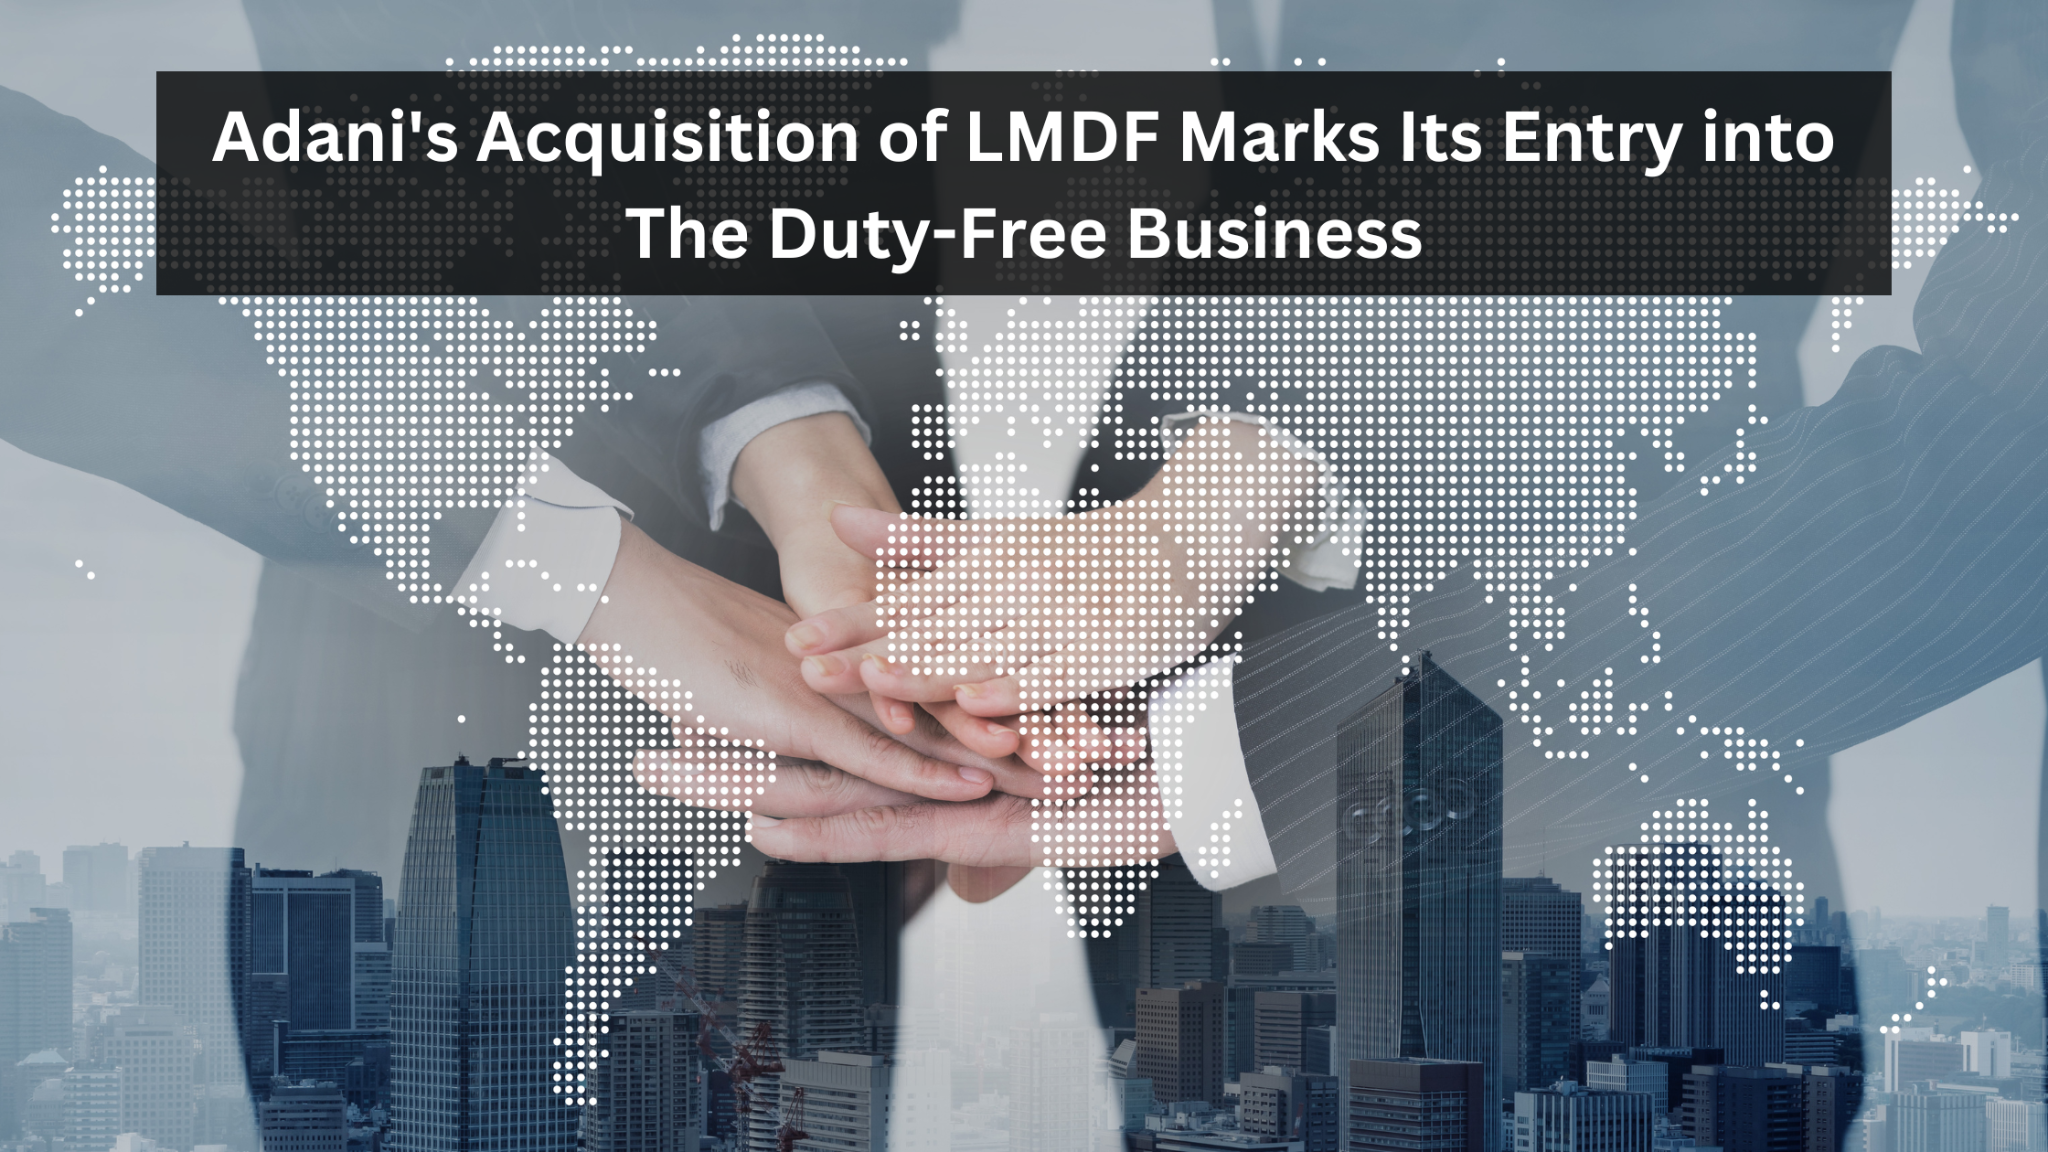 Adani's Acquisition of LMDF Marks Its Entry into The Duty-Free Business